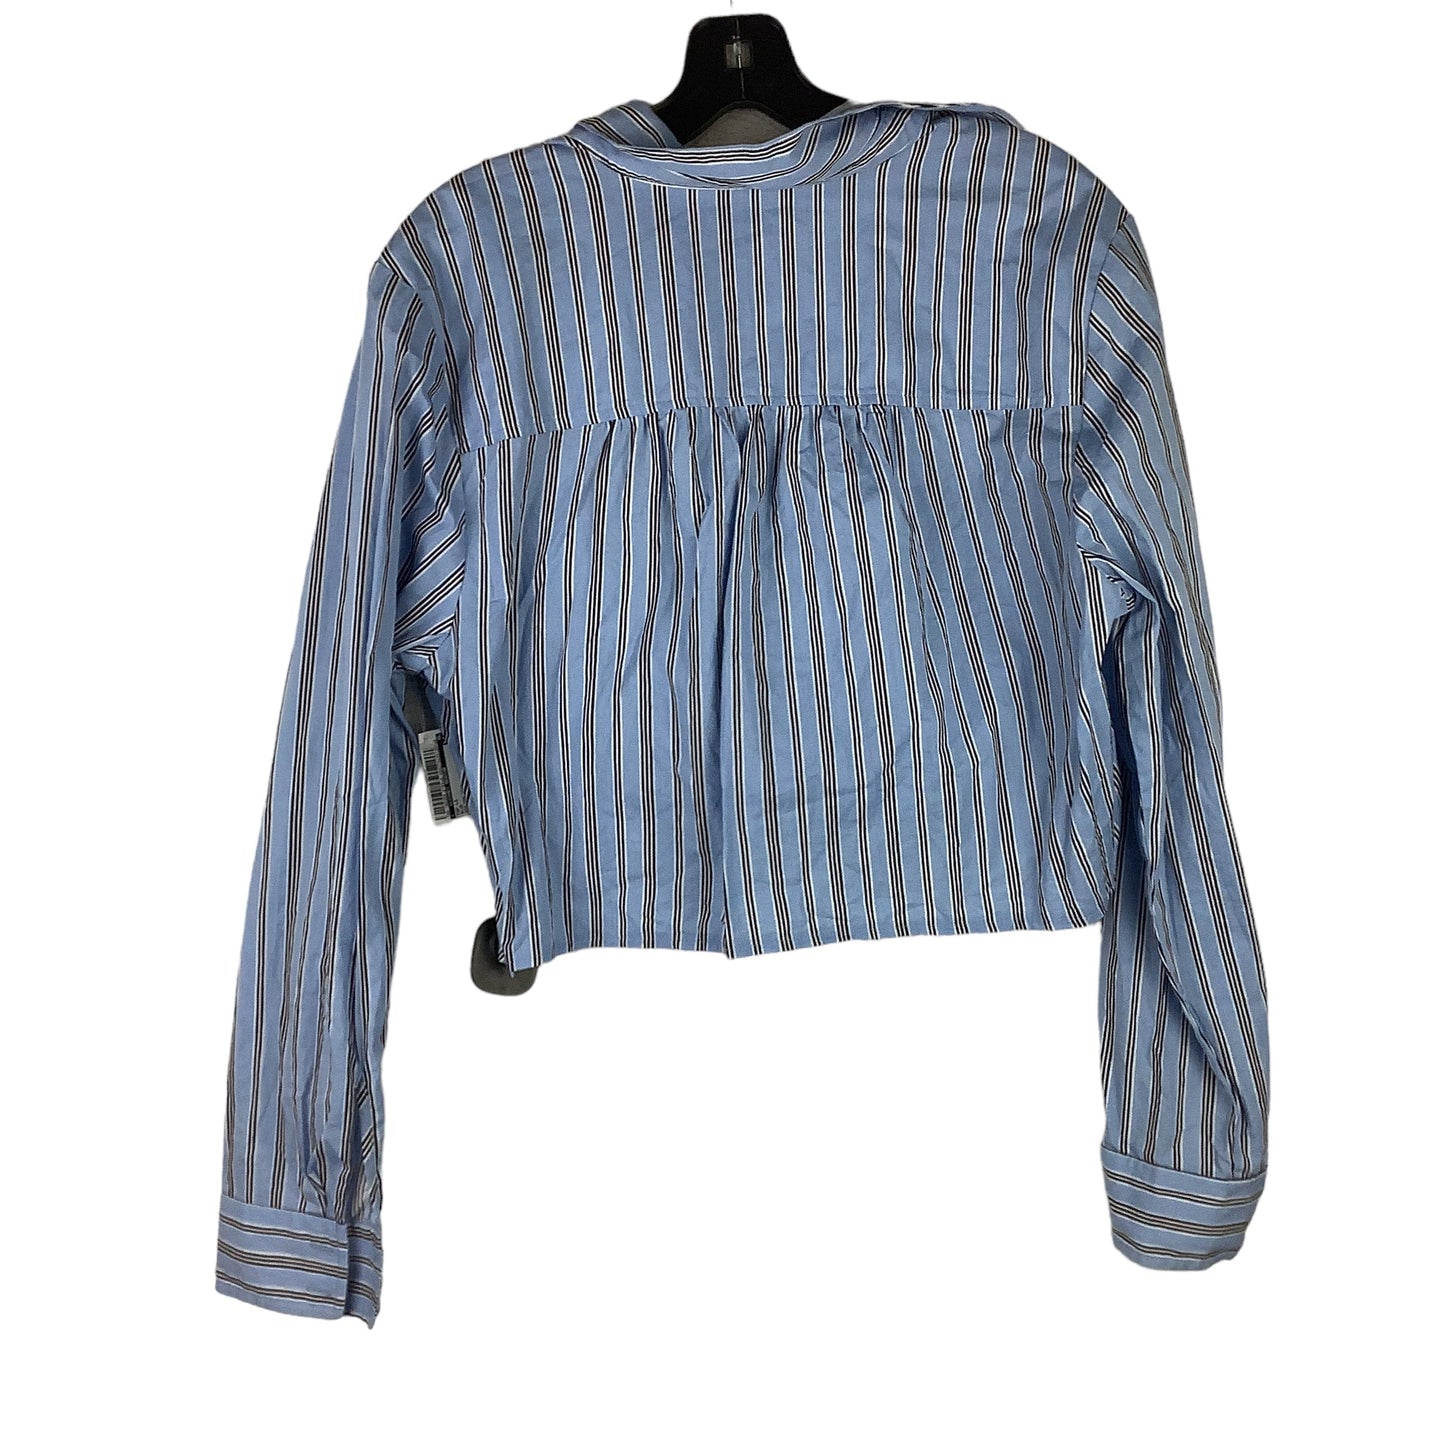 Top Long Sleeve By Clothes Mentor  Size: Xl